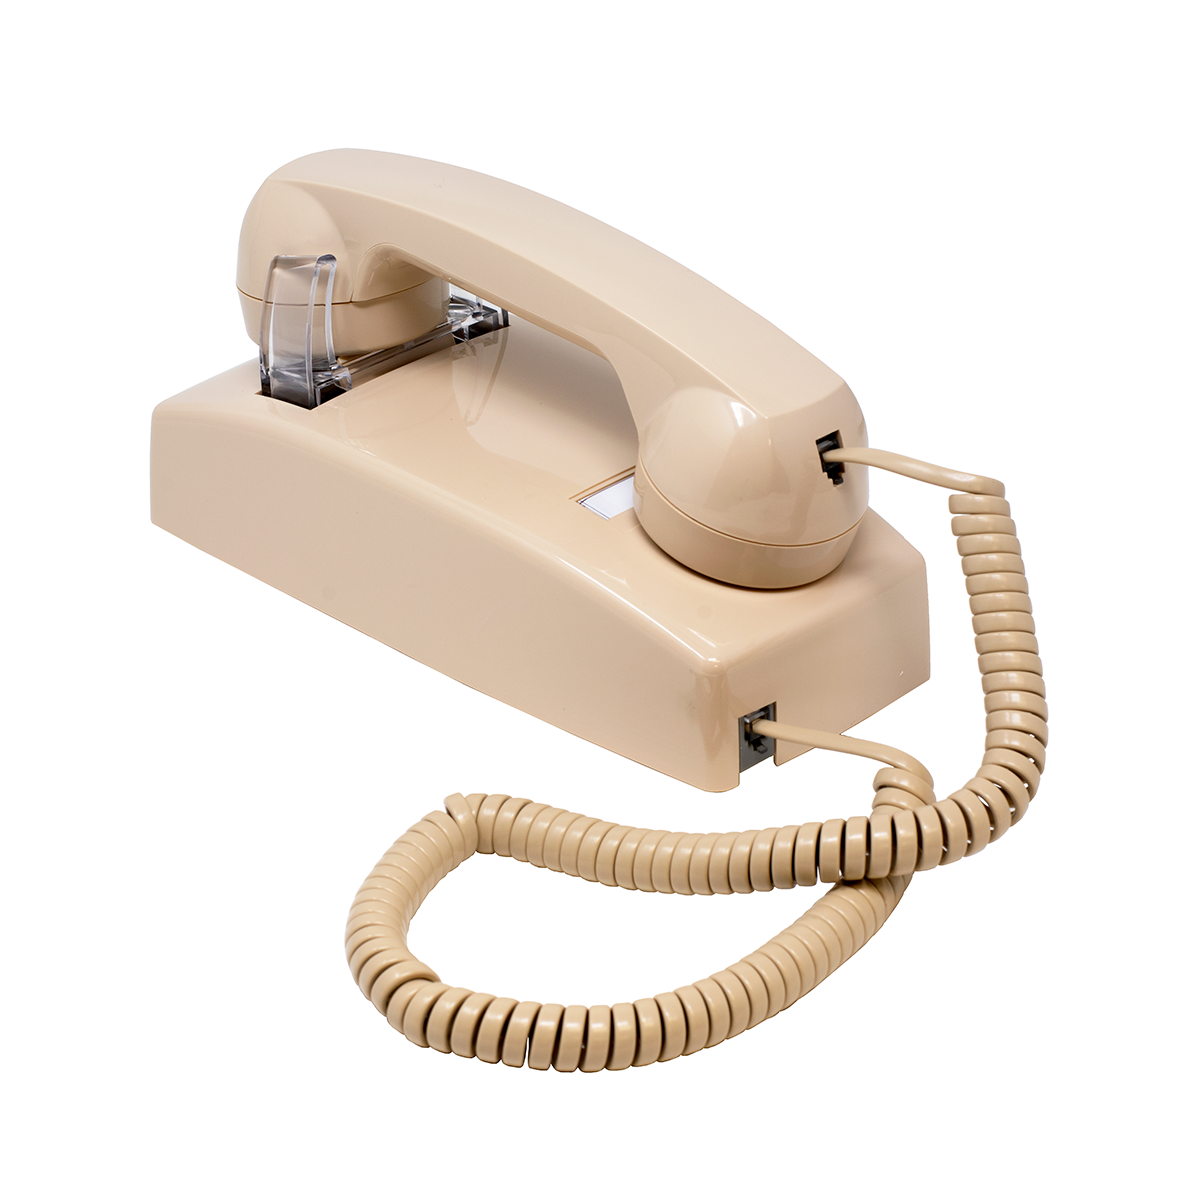 2554 Style Ivory Analog No-Dial Wall Phone